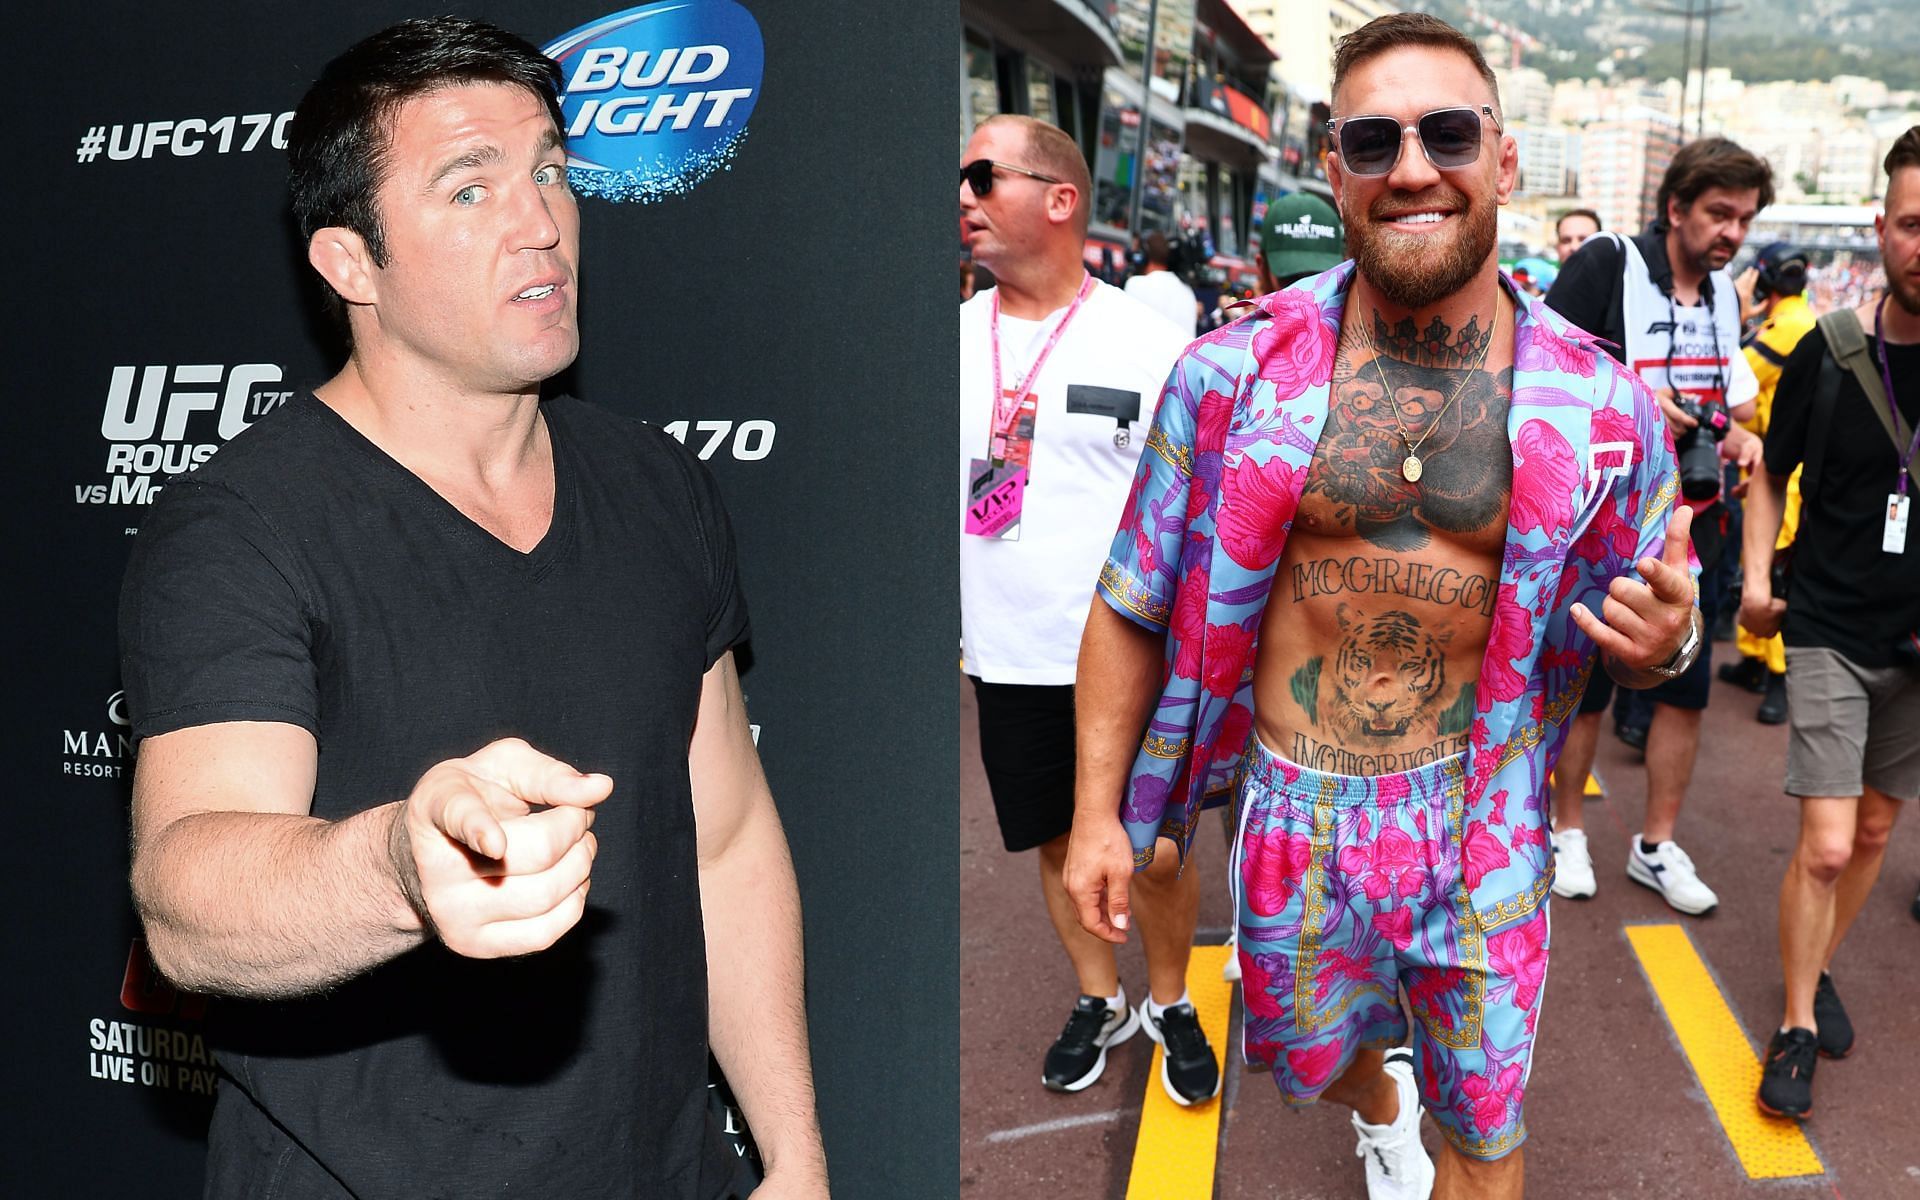 Chael Sonnen (left) and Conor McGregor (right) [Image courtesy: Getty Images]